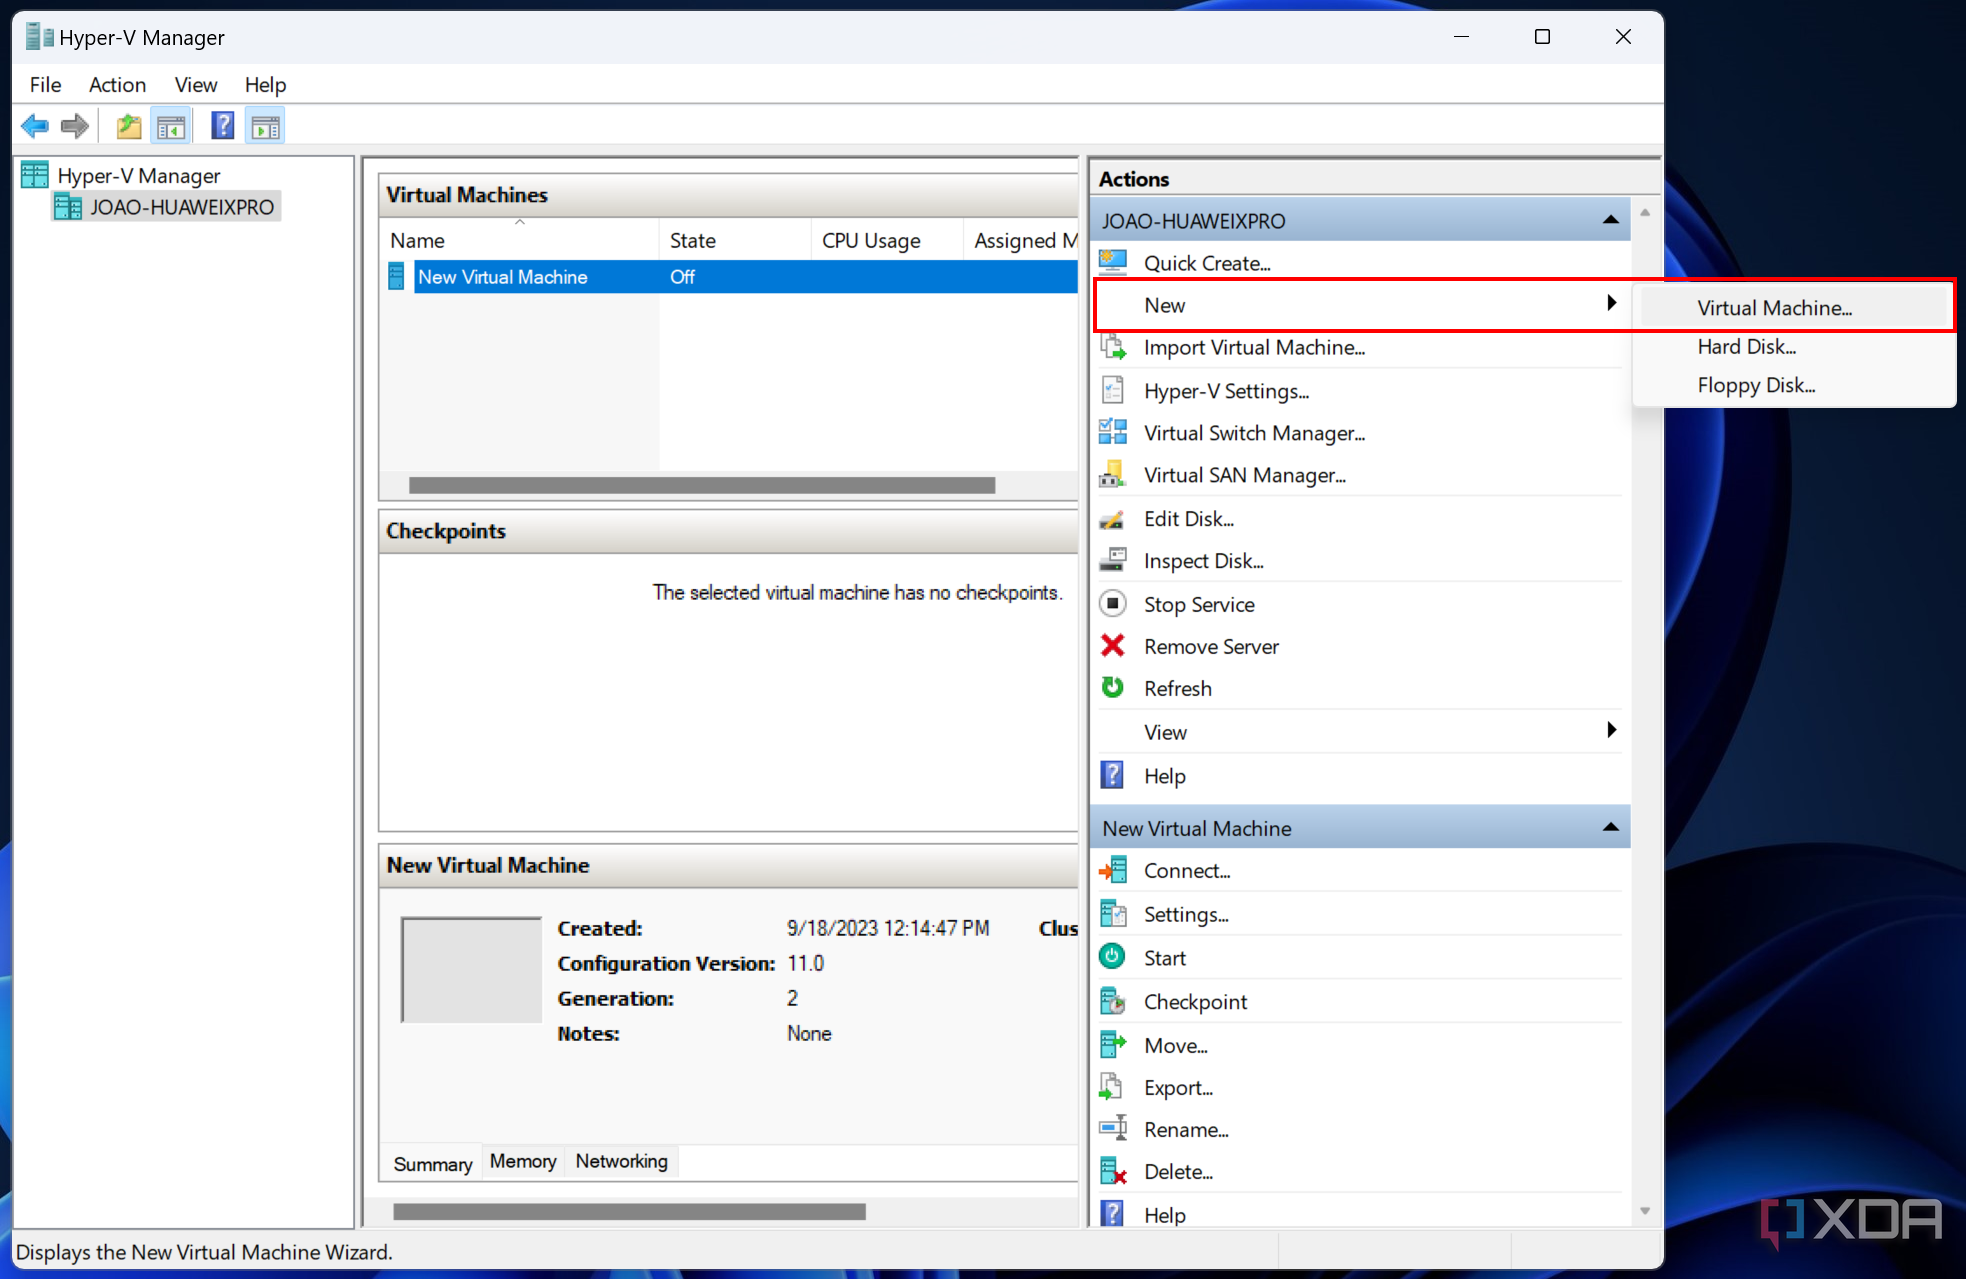 Screenshot of Hyper-V Manager showing the option to create a new virtual machine